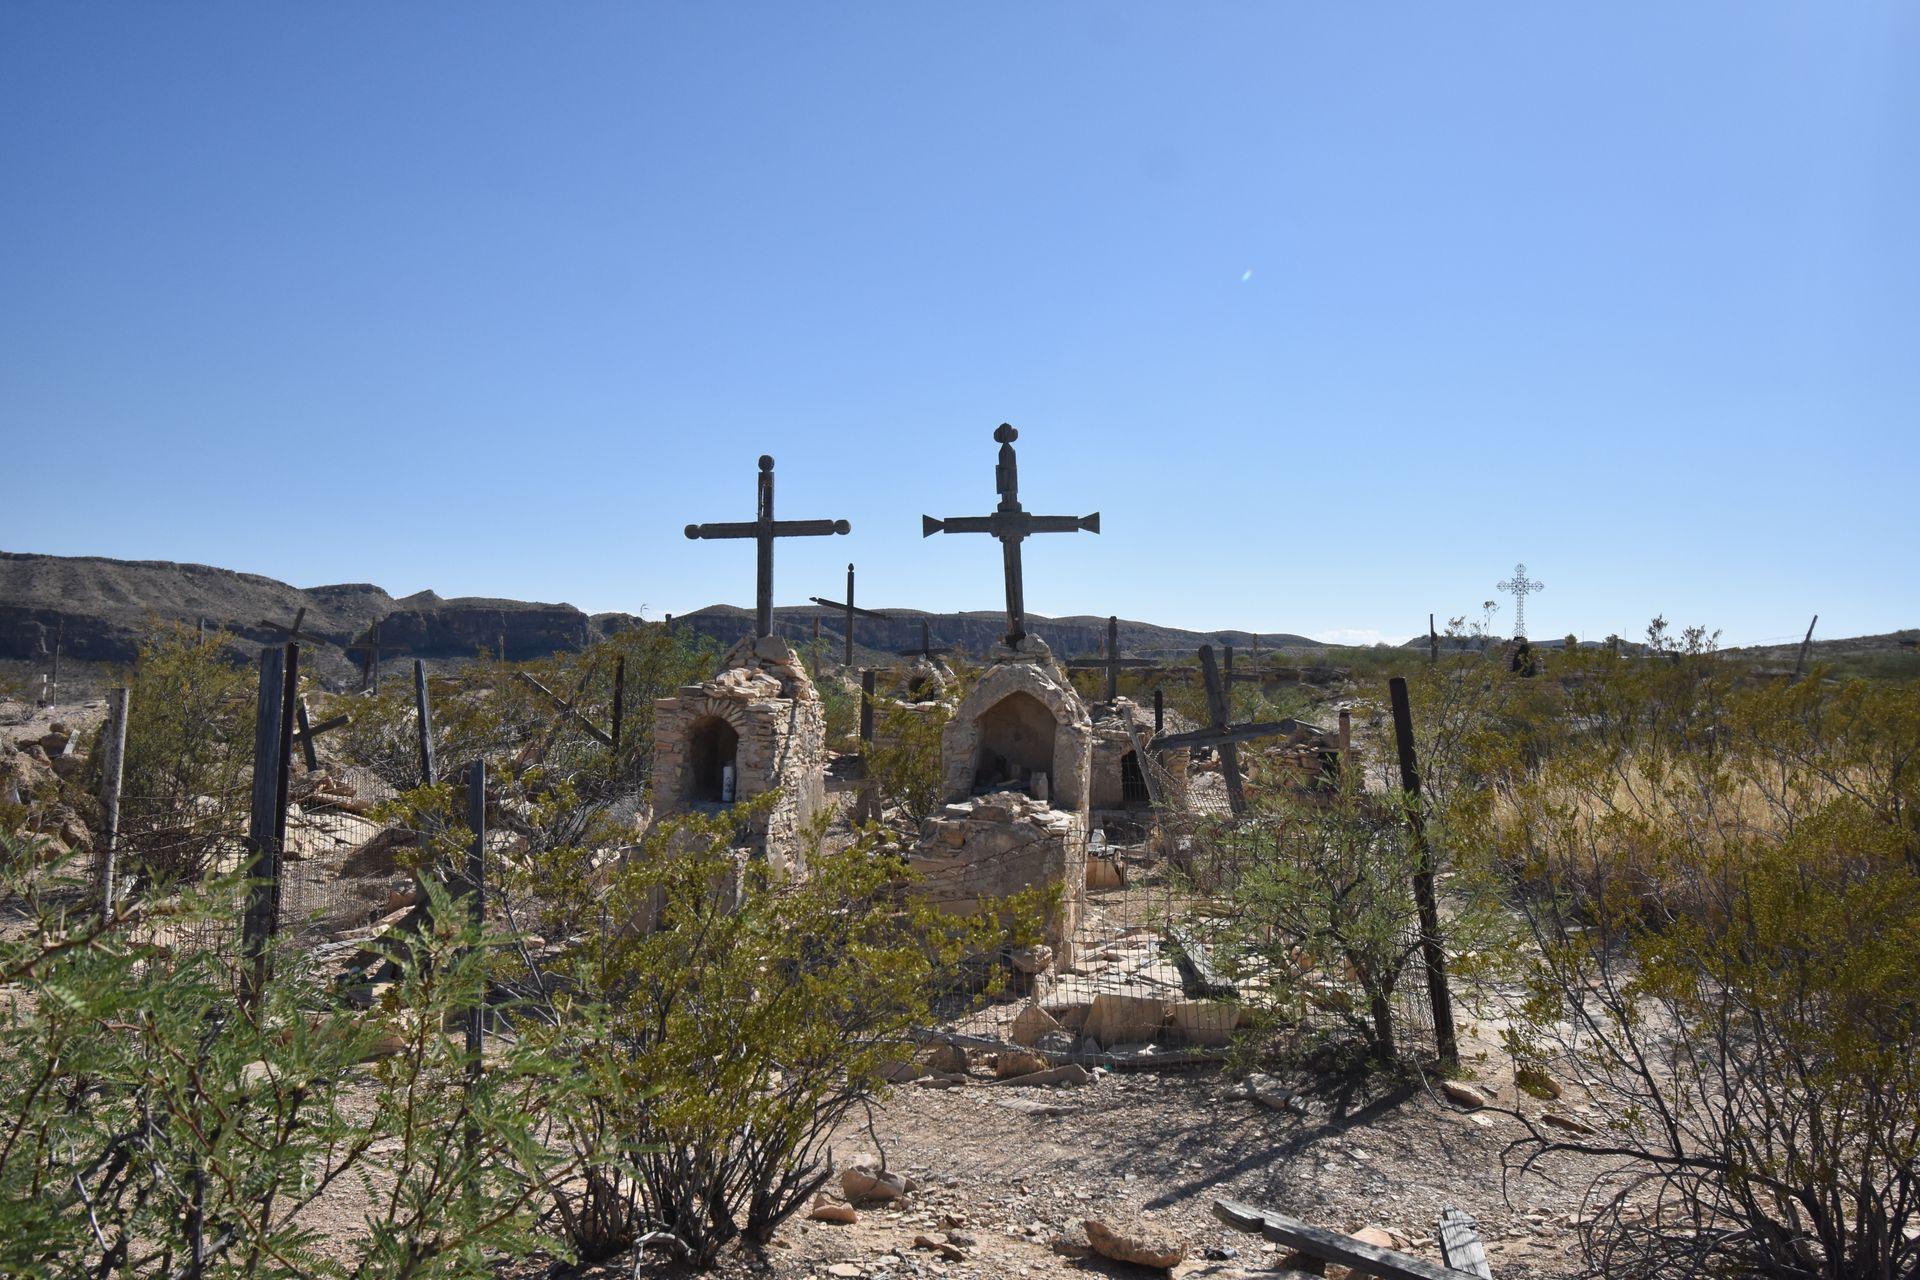 Crosses and a couple gravestones stick up out of the ground in the Terlingua Cemetery. They are surrounded by desert plants.